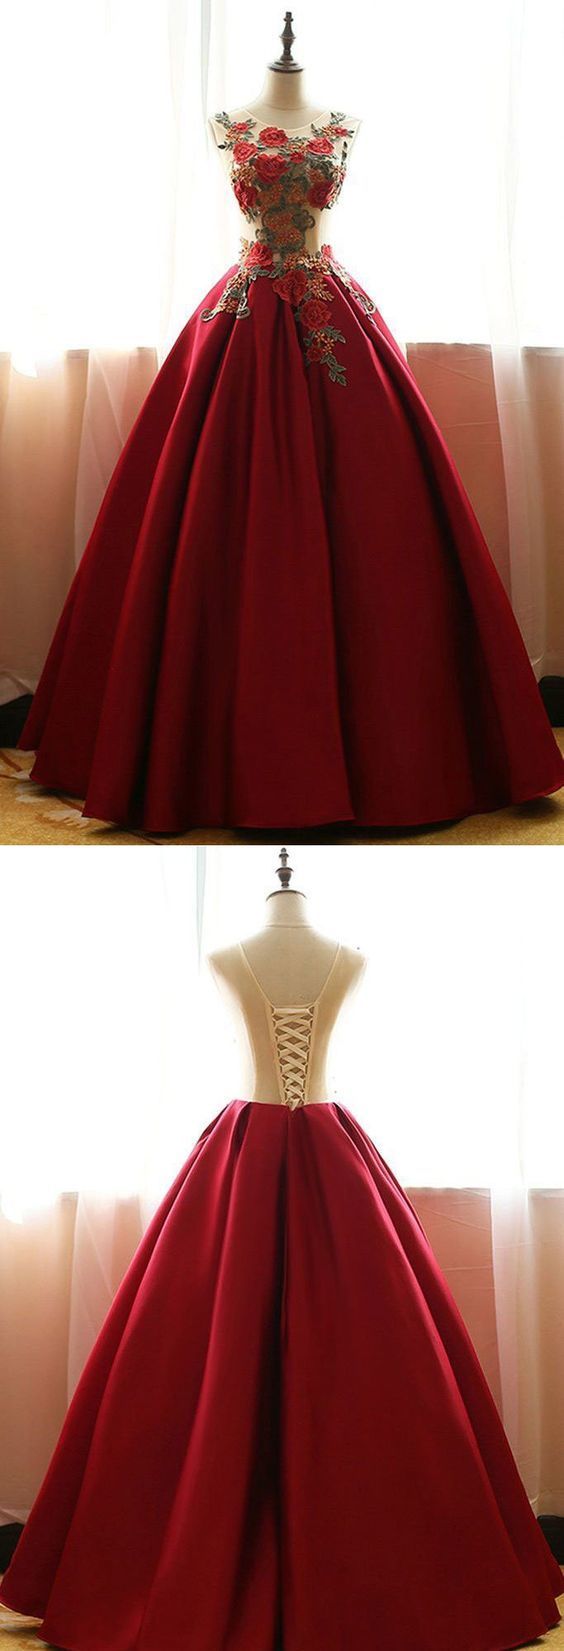 Red Quinceanera Dresses,satin Prom Dresses With Flowers,ball Gown Prom Dresses,rose Applique Prom Gown,a-line Evening Dress,long Prom